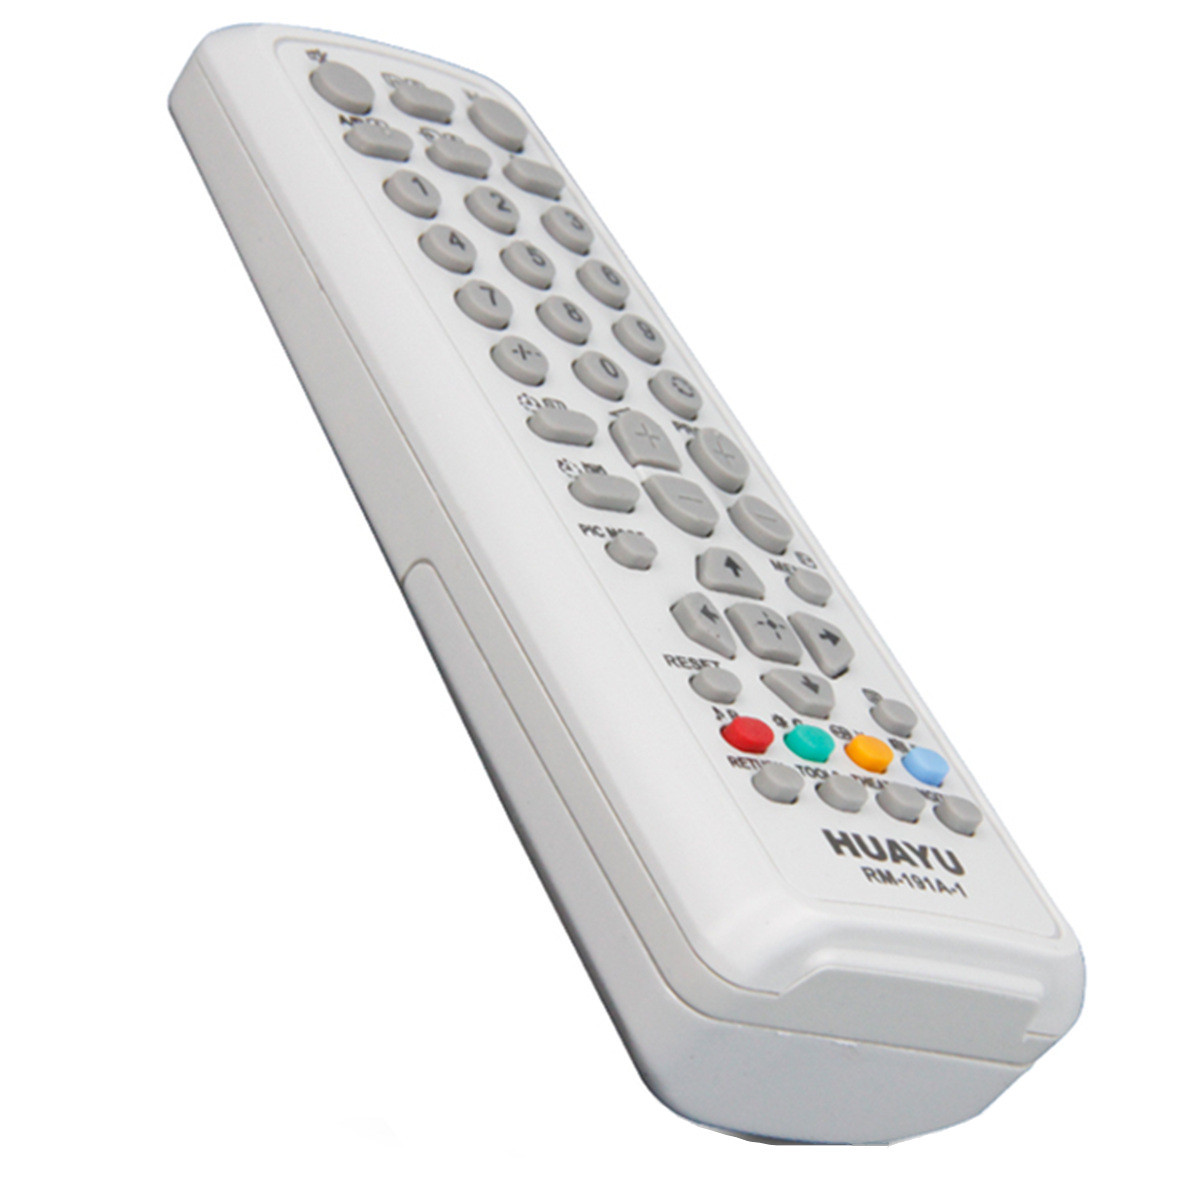 HUAYU-TV-Remote-Control-RM-191A-1-for-Sony-RM-W100-SUPER870-Television-1624854-4